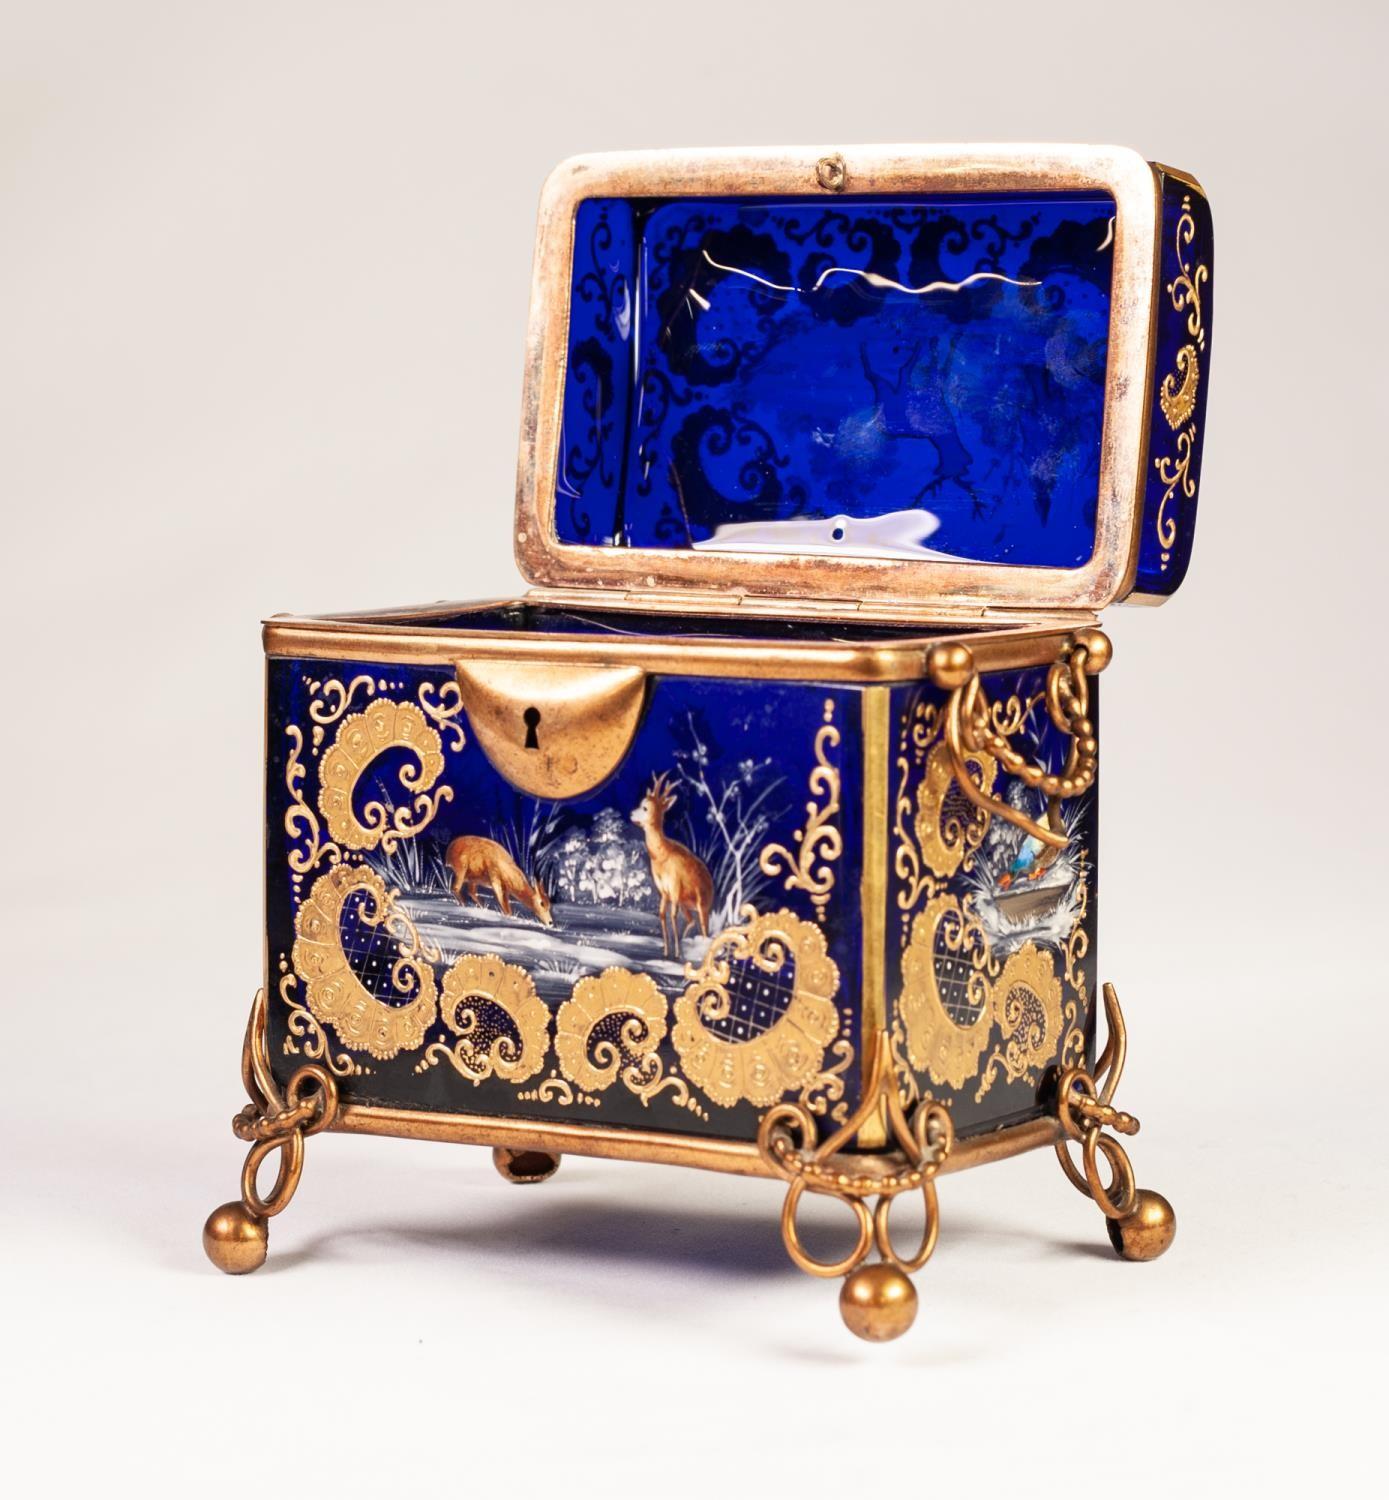 MOSER STYLE LATE NINETEENTH CENTURY ENAMELLED AND GILT METAL MOUNTED COBALT BLUE GLASS CASKET, of - Image 7 of 10